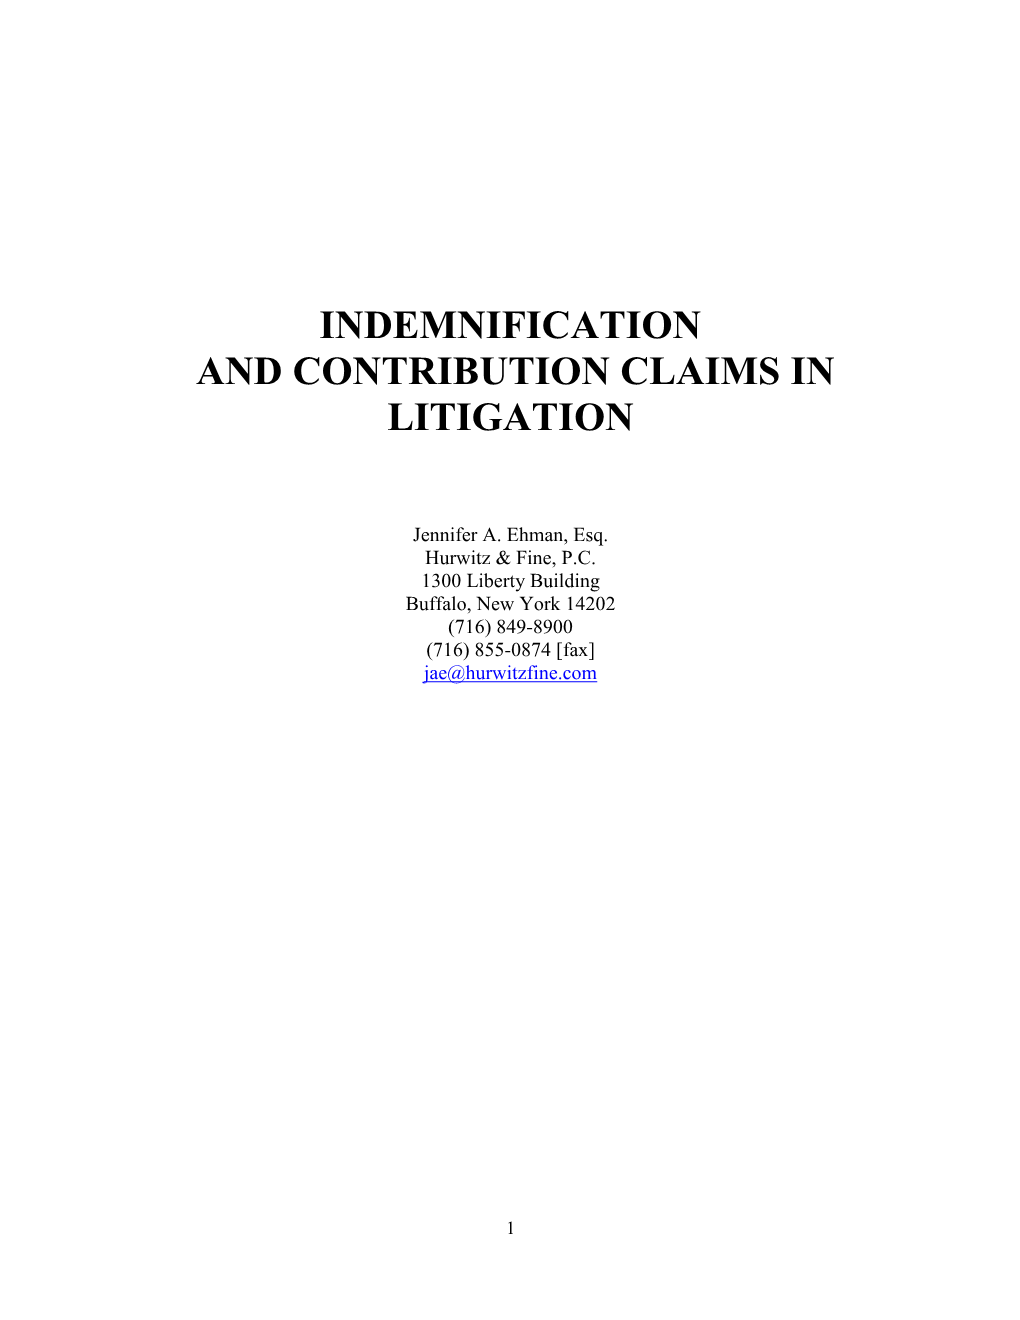 Indemnification and Contribution Claims in Litigation